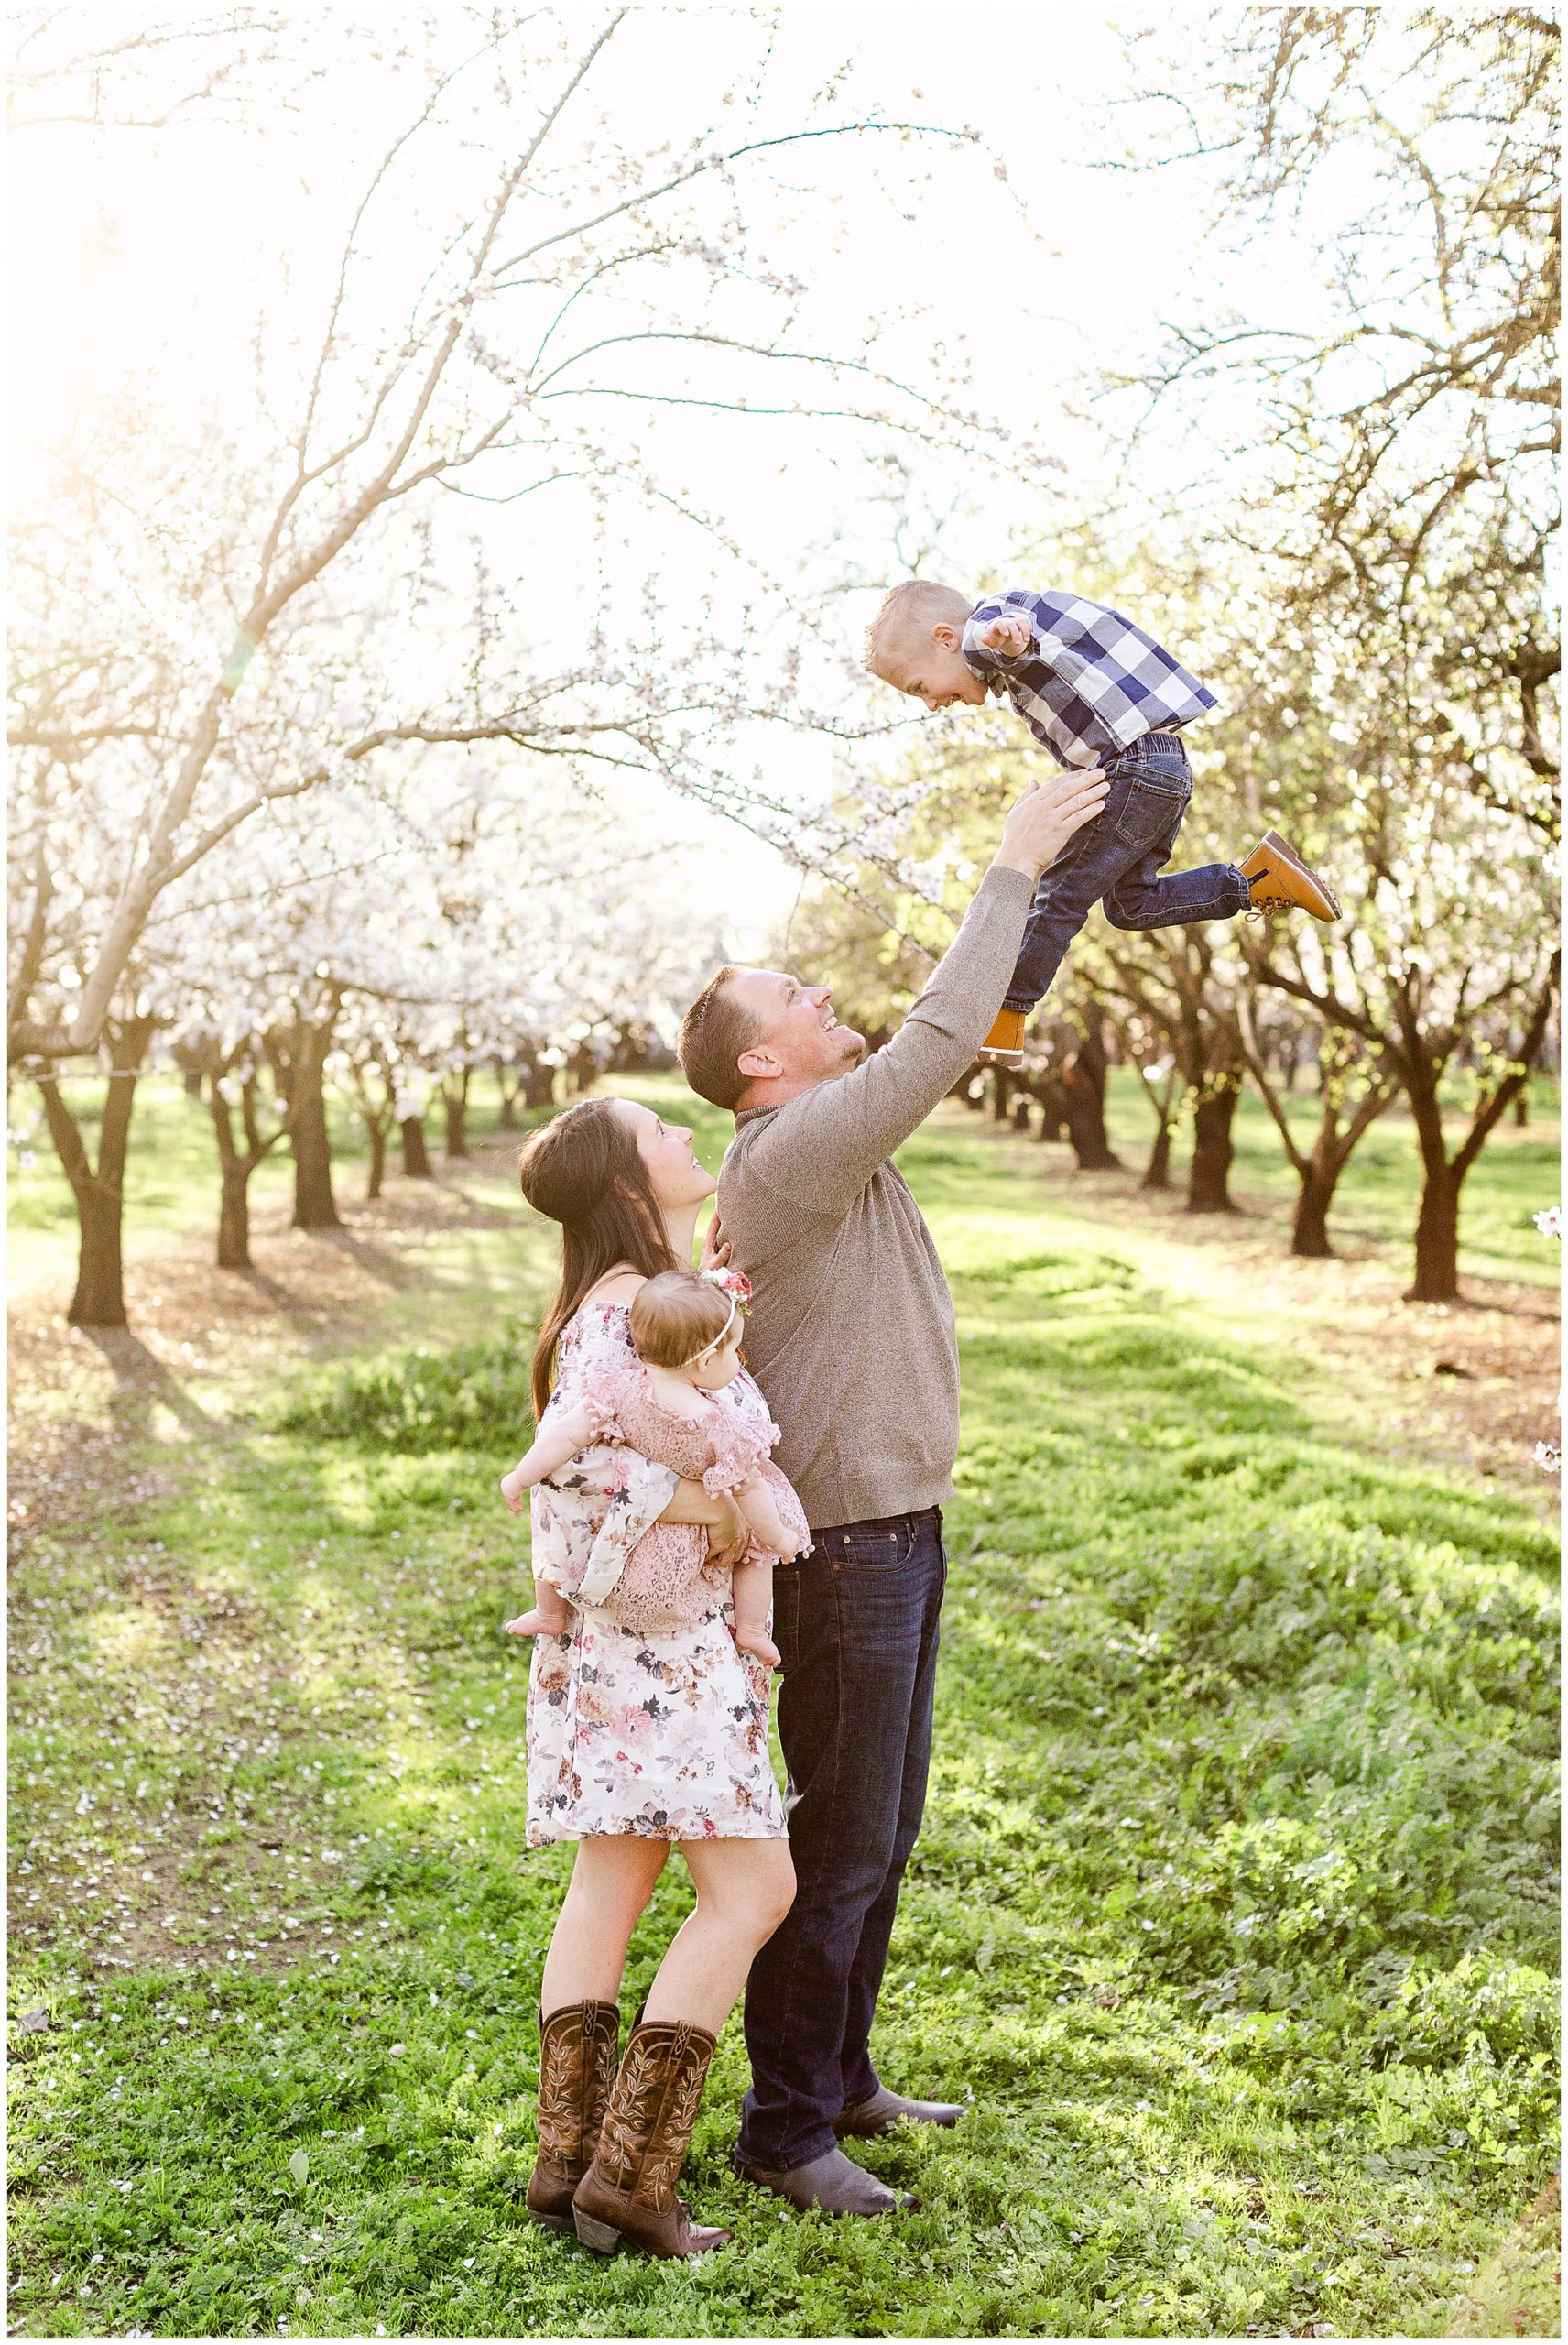 Playing in Almond Orchard Blossoms | Alyssa + Ben